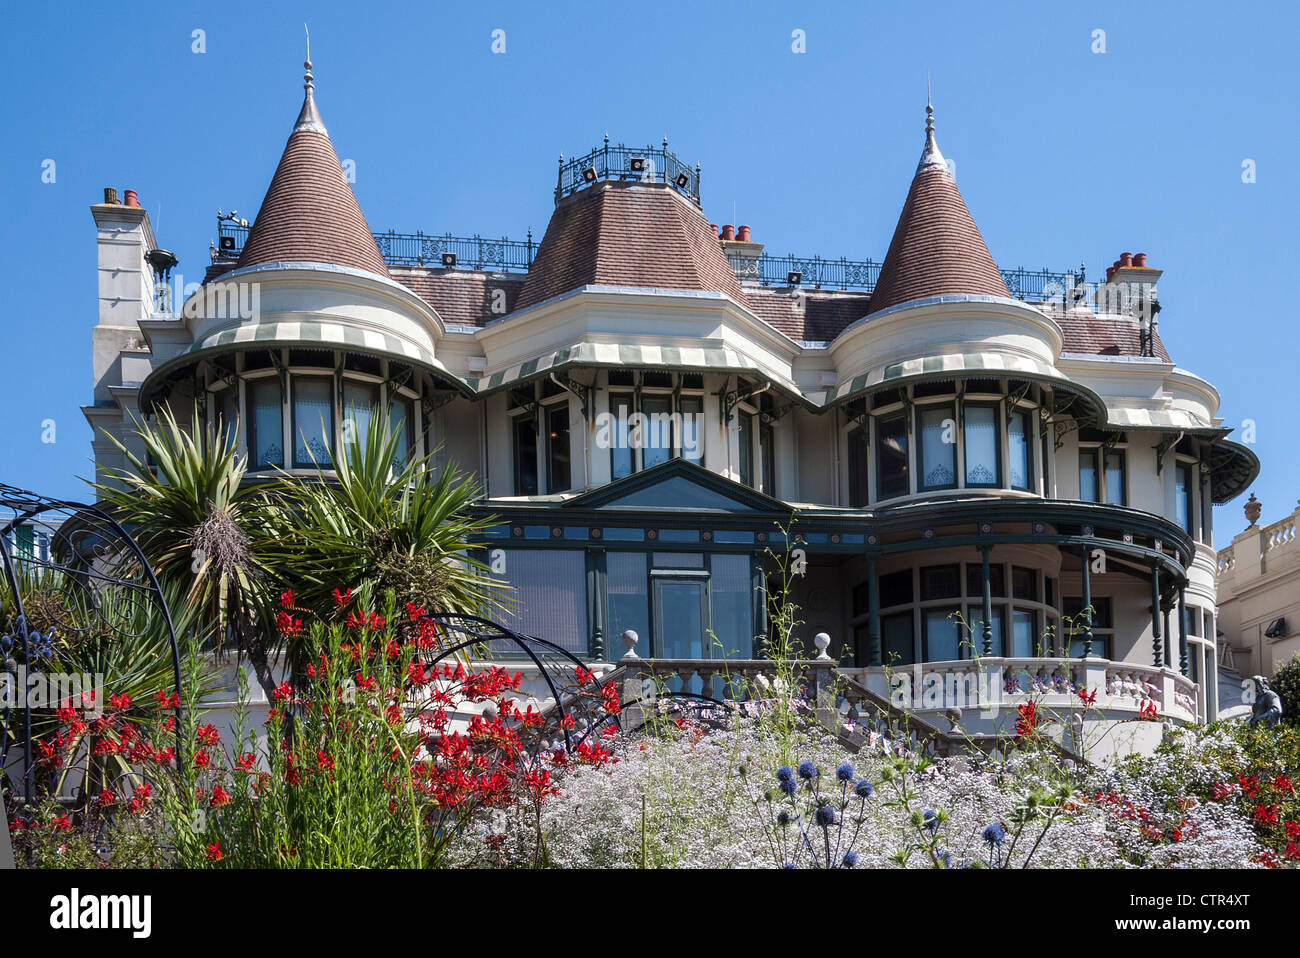 Russell-Cotes Art Gallery and Museum, Bournemouth, Dorset, England, UK Stock Photo